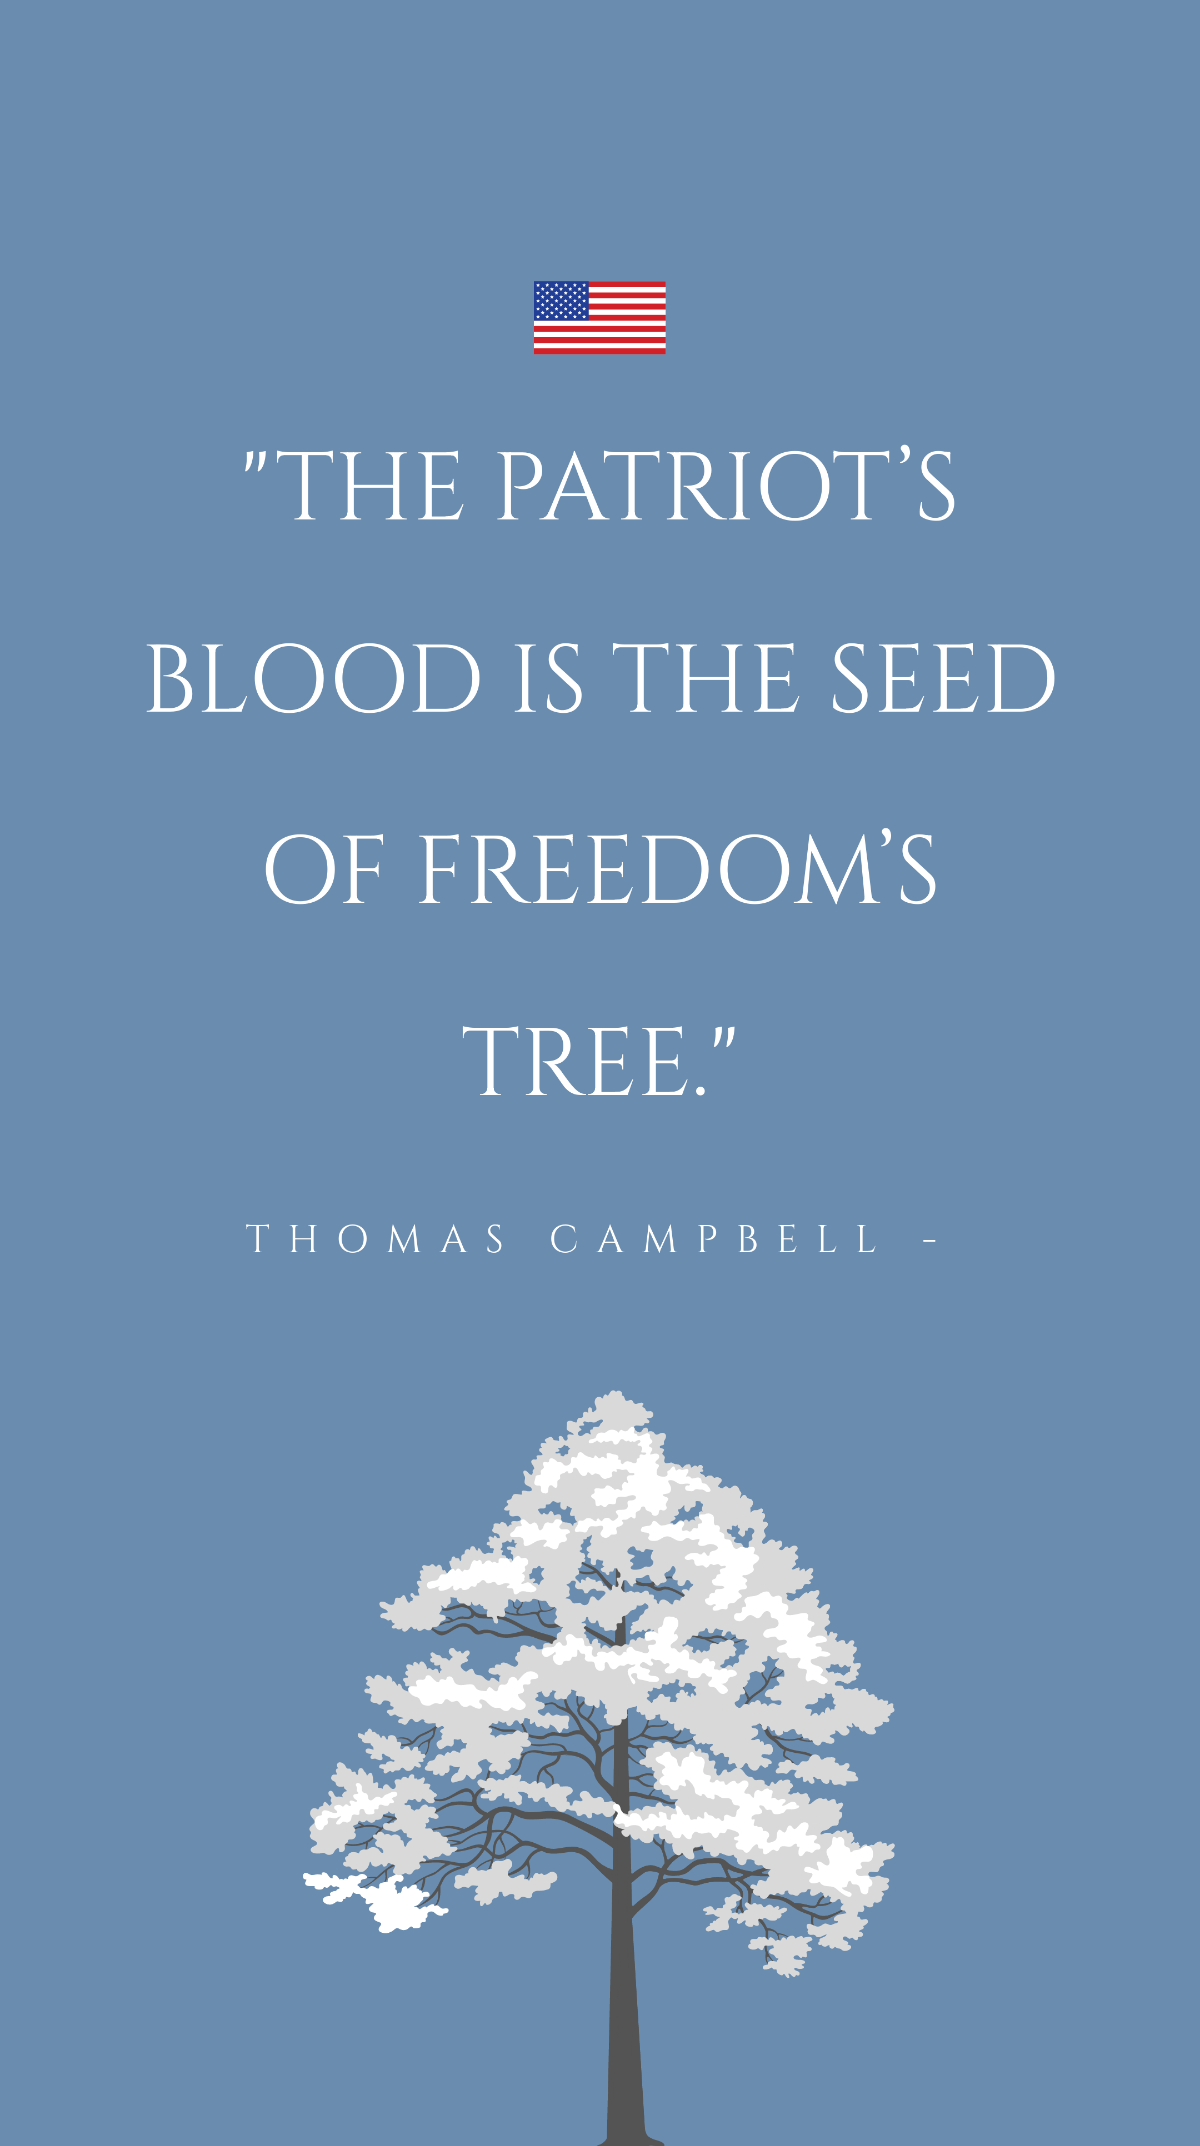 Thomas Campbell - The patriot’s blood is the seed of freedom’s tree. Template